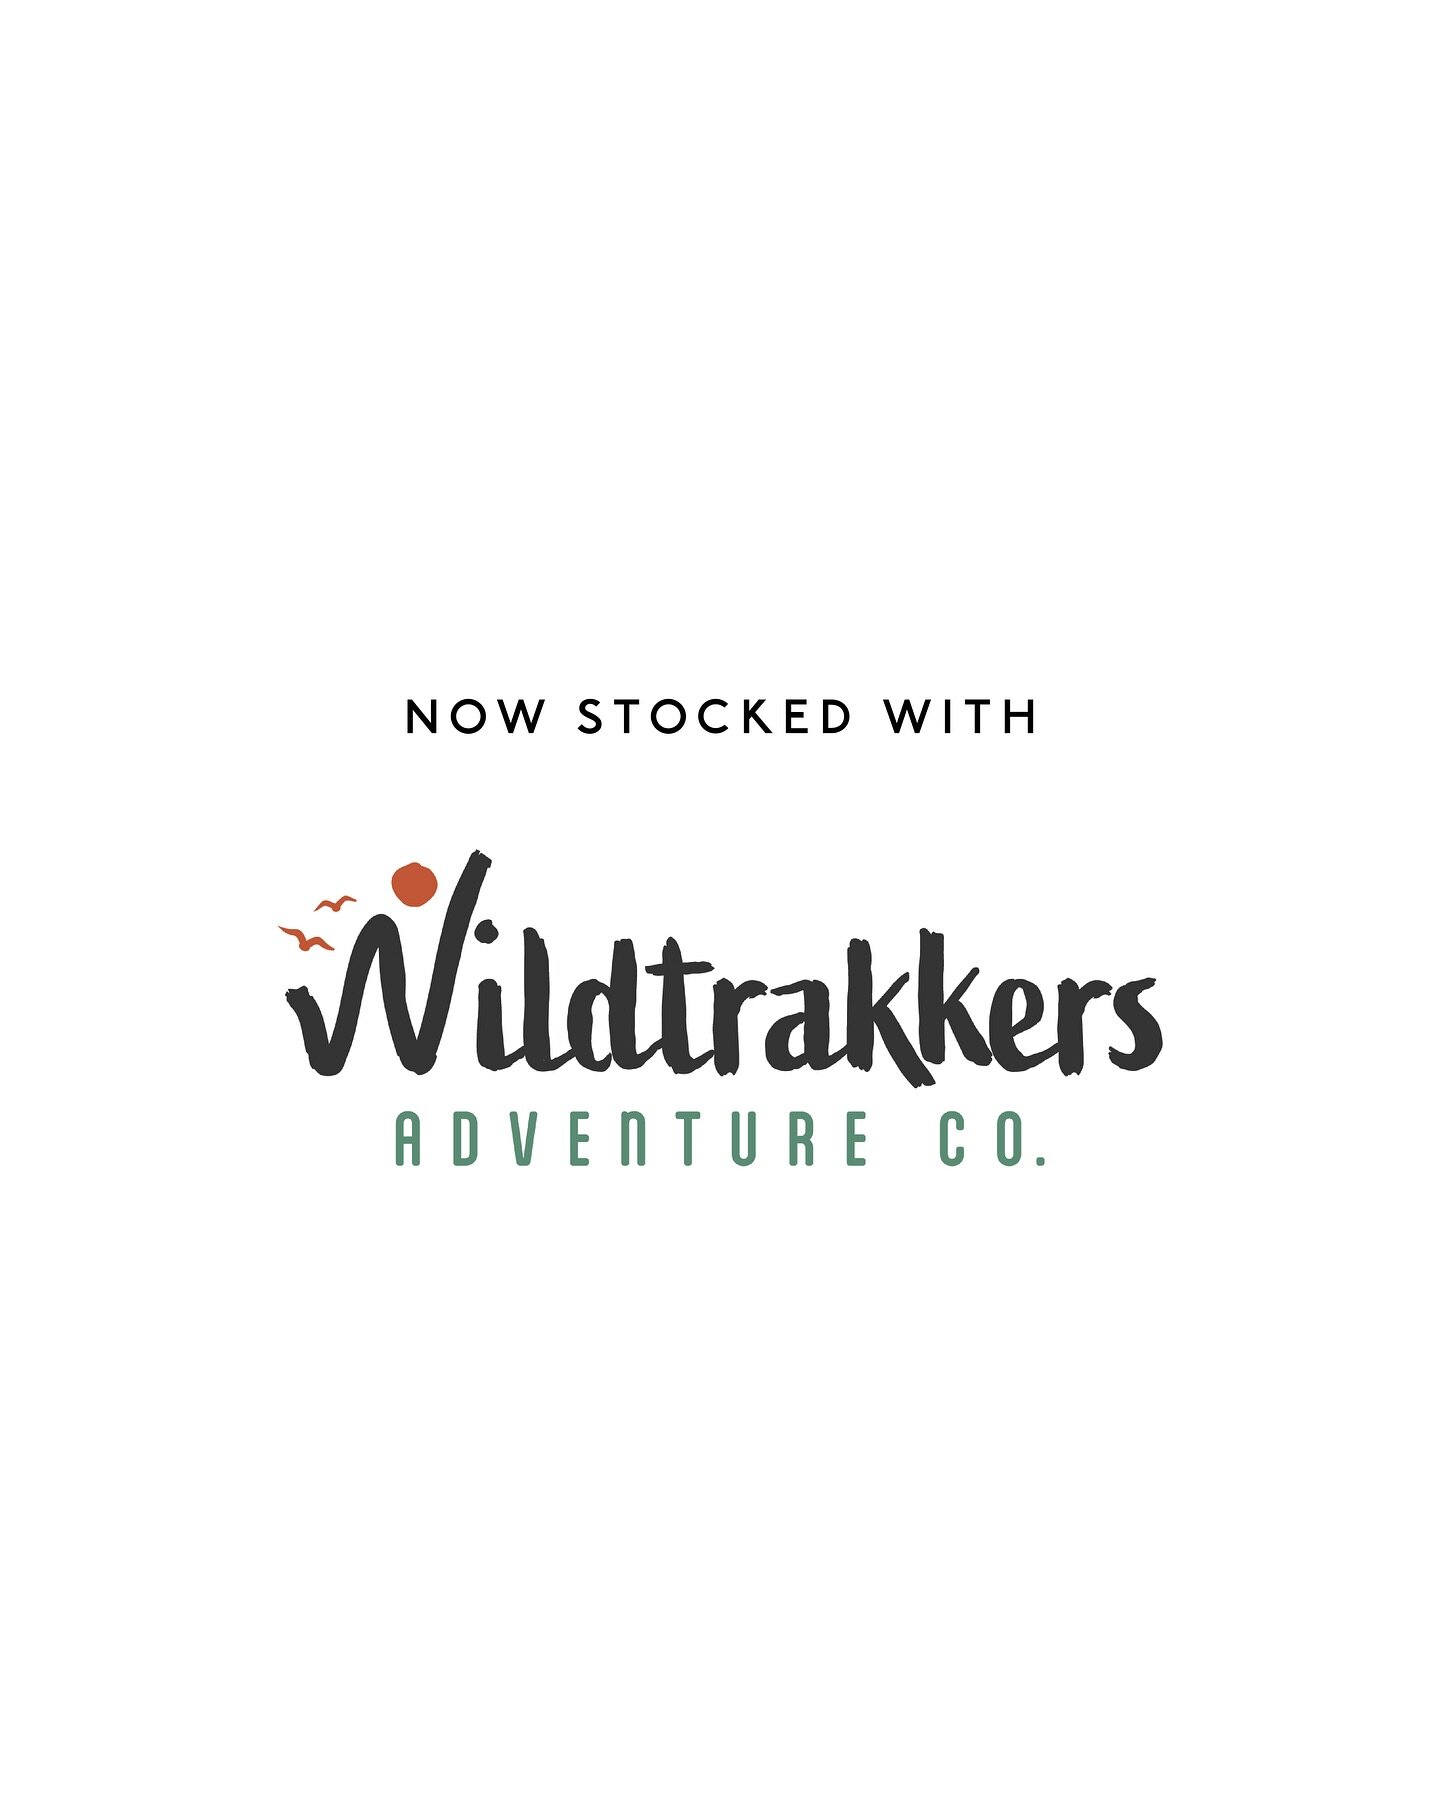 🔔 New stockist alert! 🔔 

Introducing a wonderful family of four who have just launched Wild Trakkers Adventure Co.
&nbsp;
Armed with a caravan and an appetite for adventuring, Nicole and her family have been doing some epic trips on Eyre Peninsula